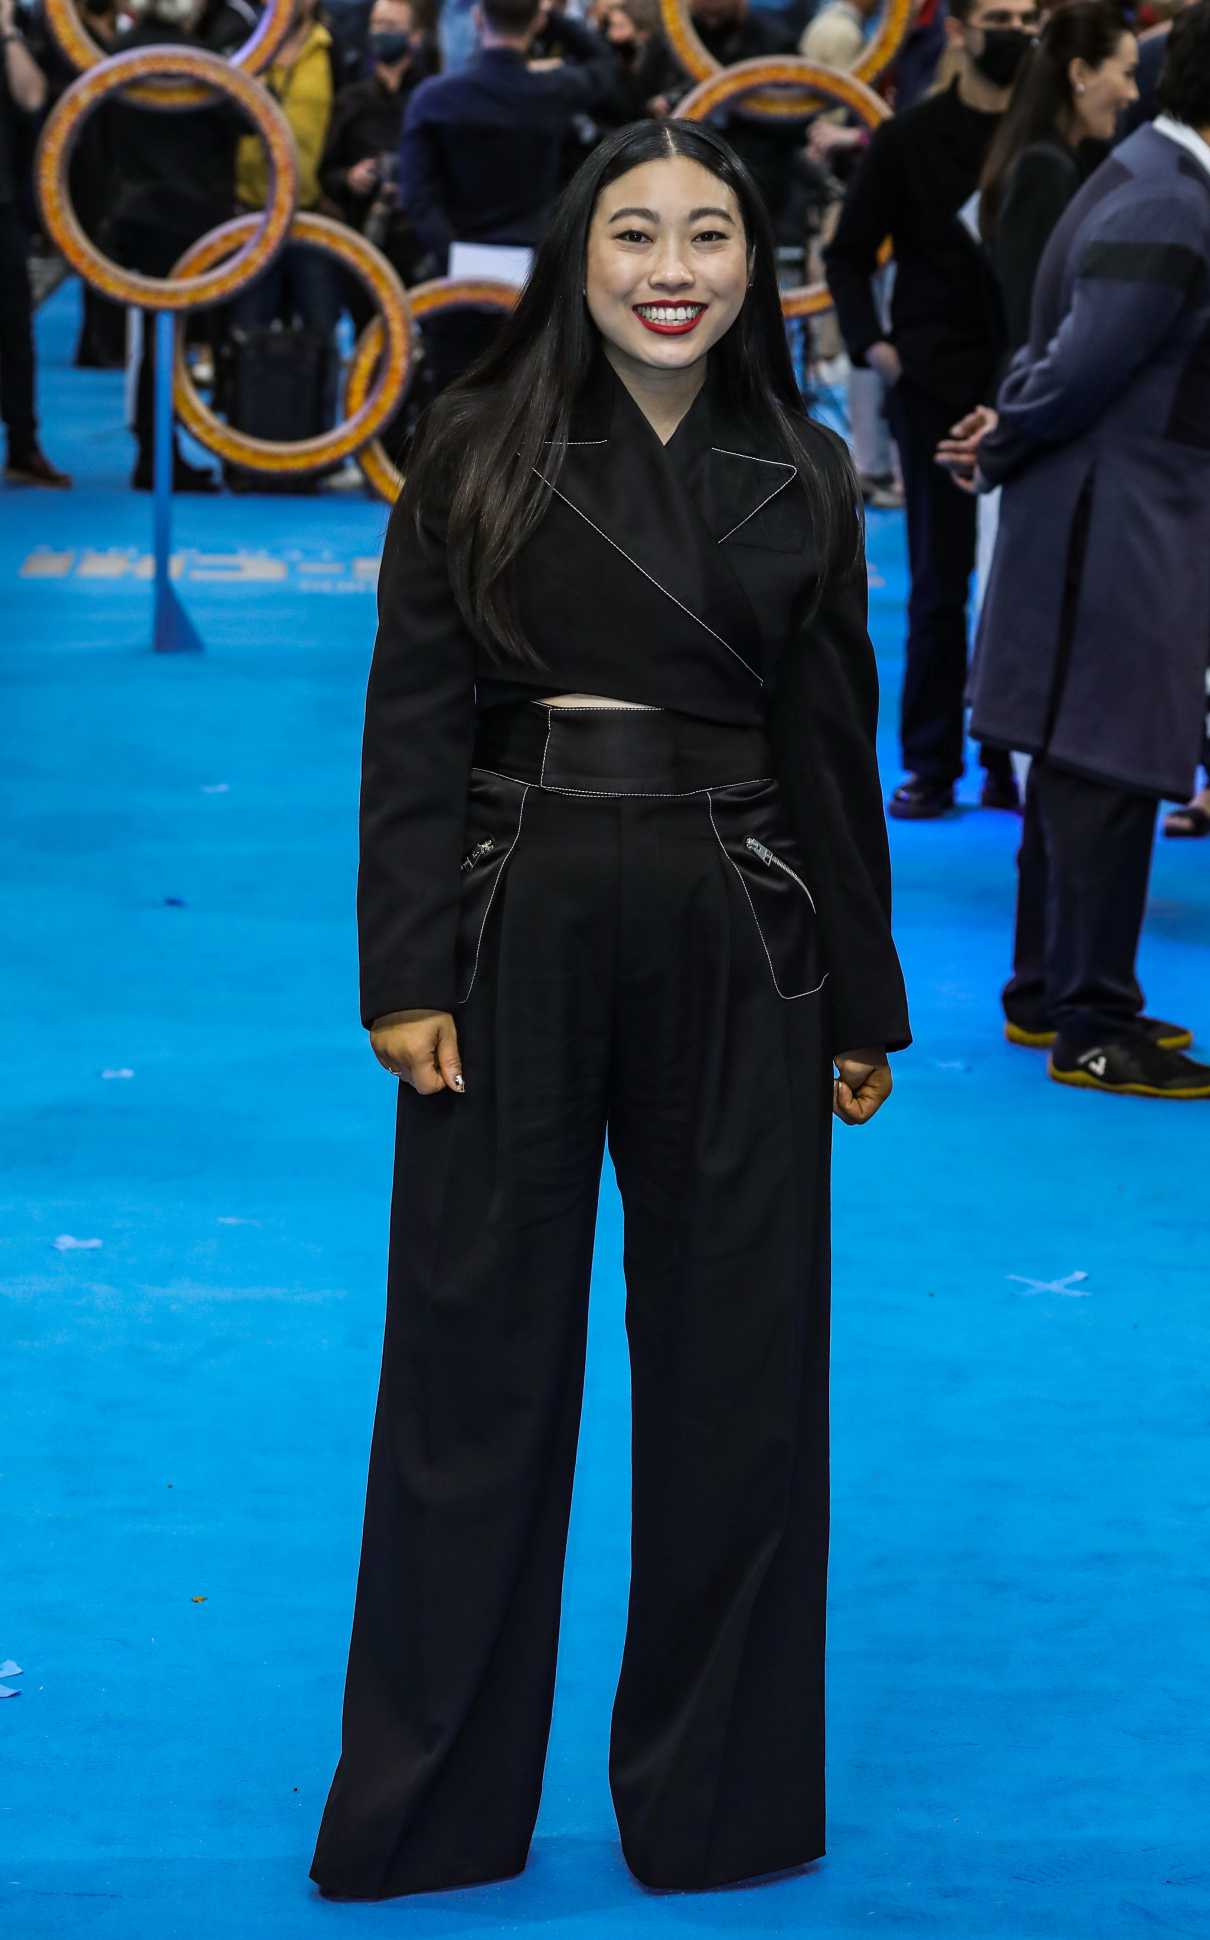 Awkwafina in a Black Suit